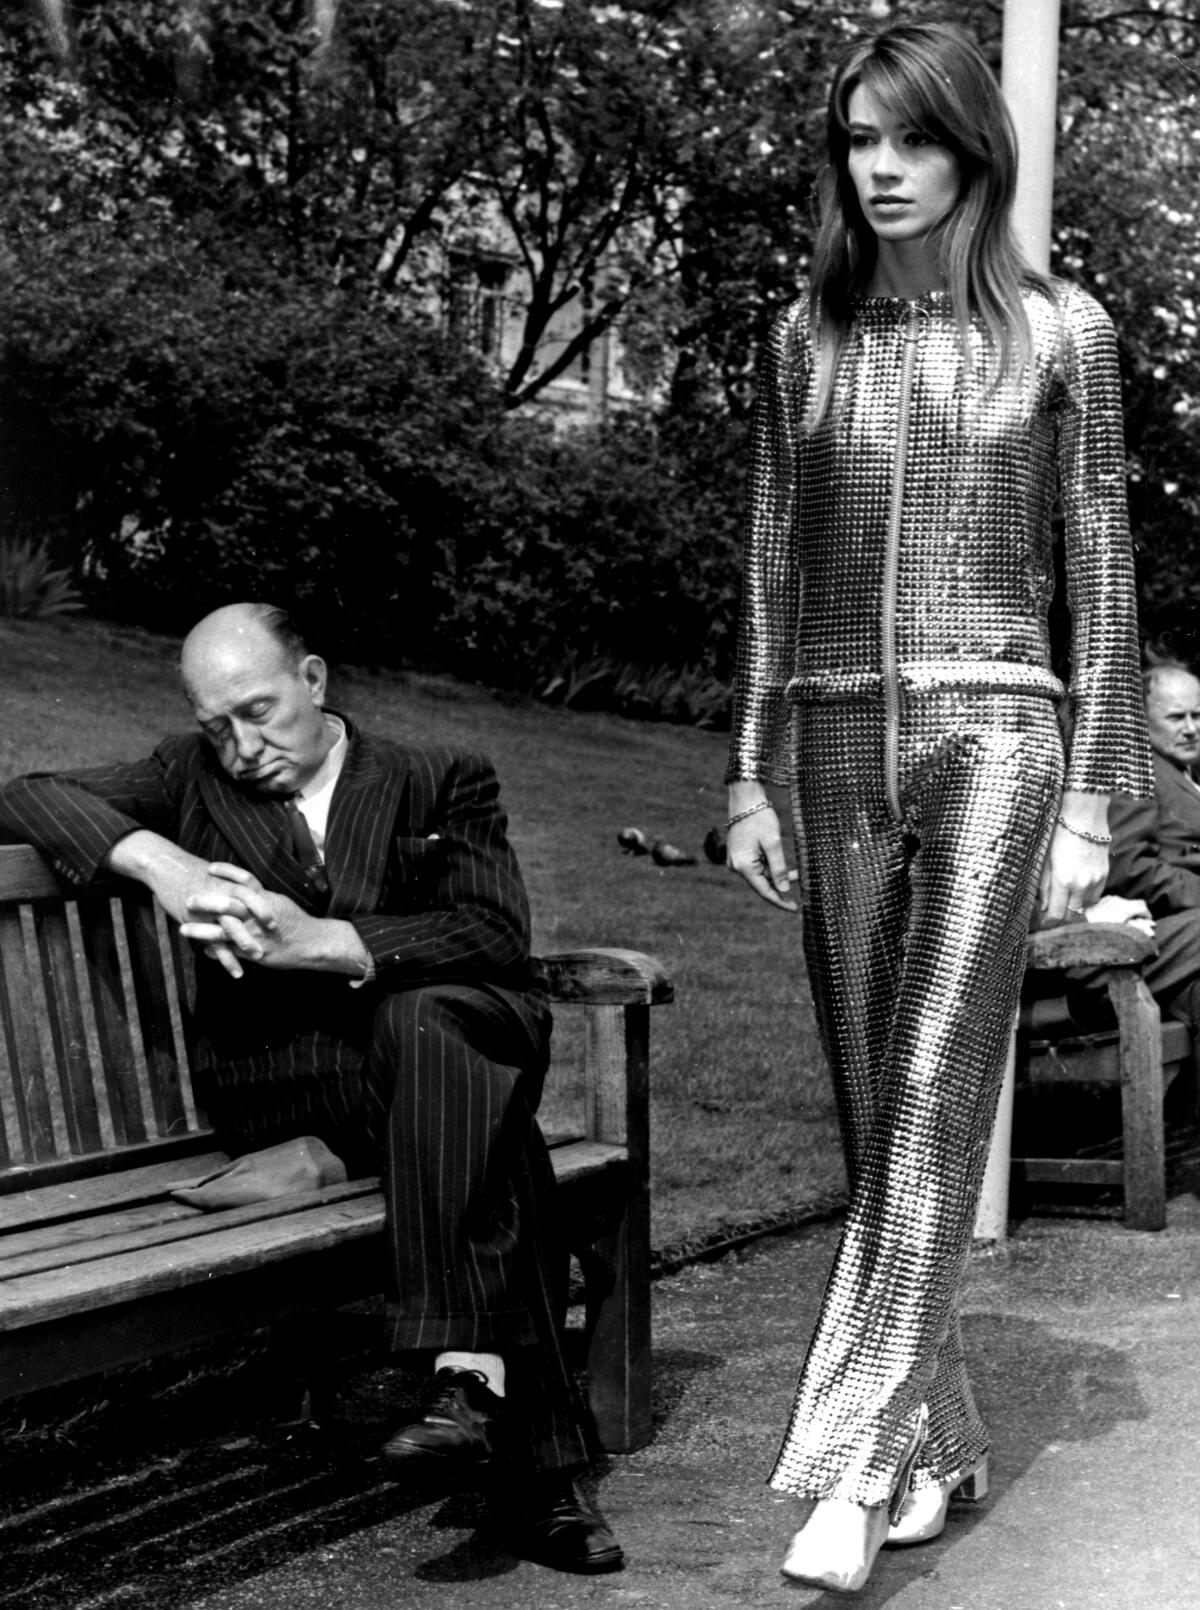 Francoise Hardy walks past a middle-aged man dressed in a suit and pretending to be asleep on a park bench. 